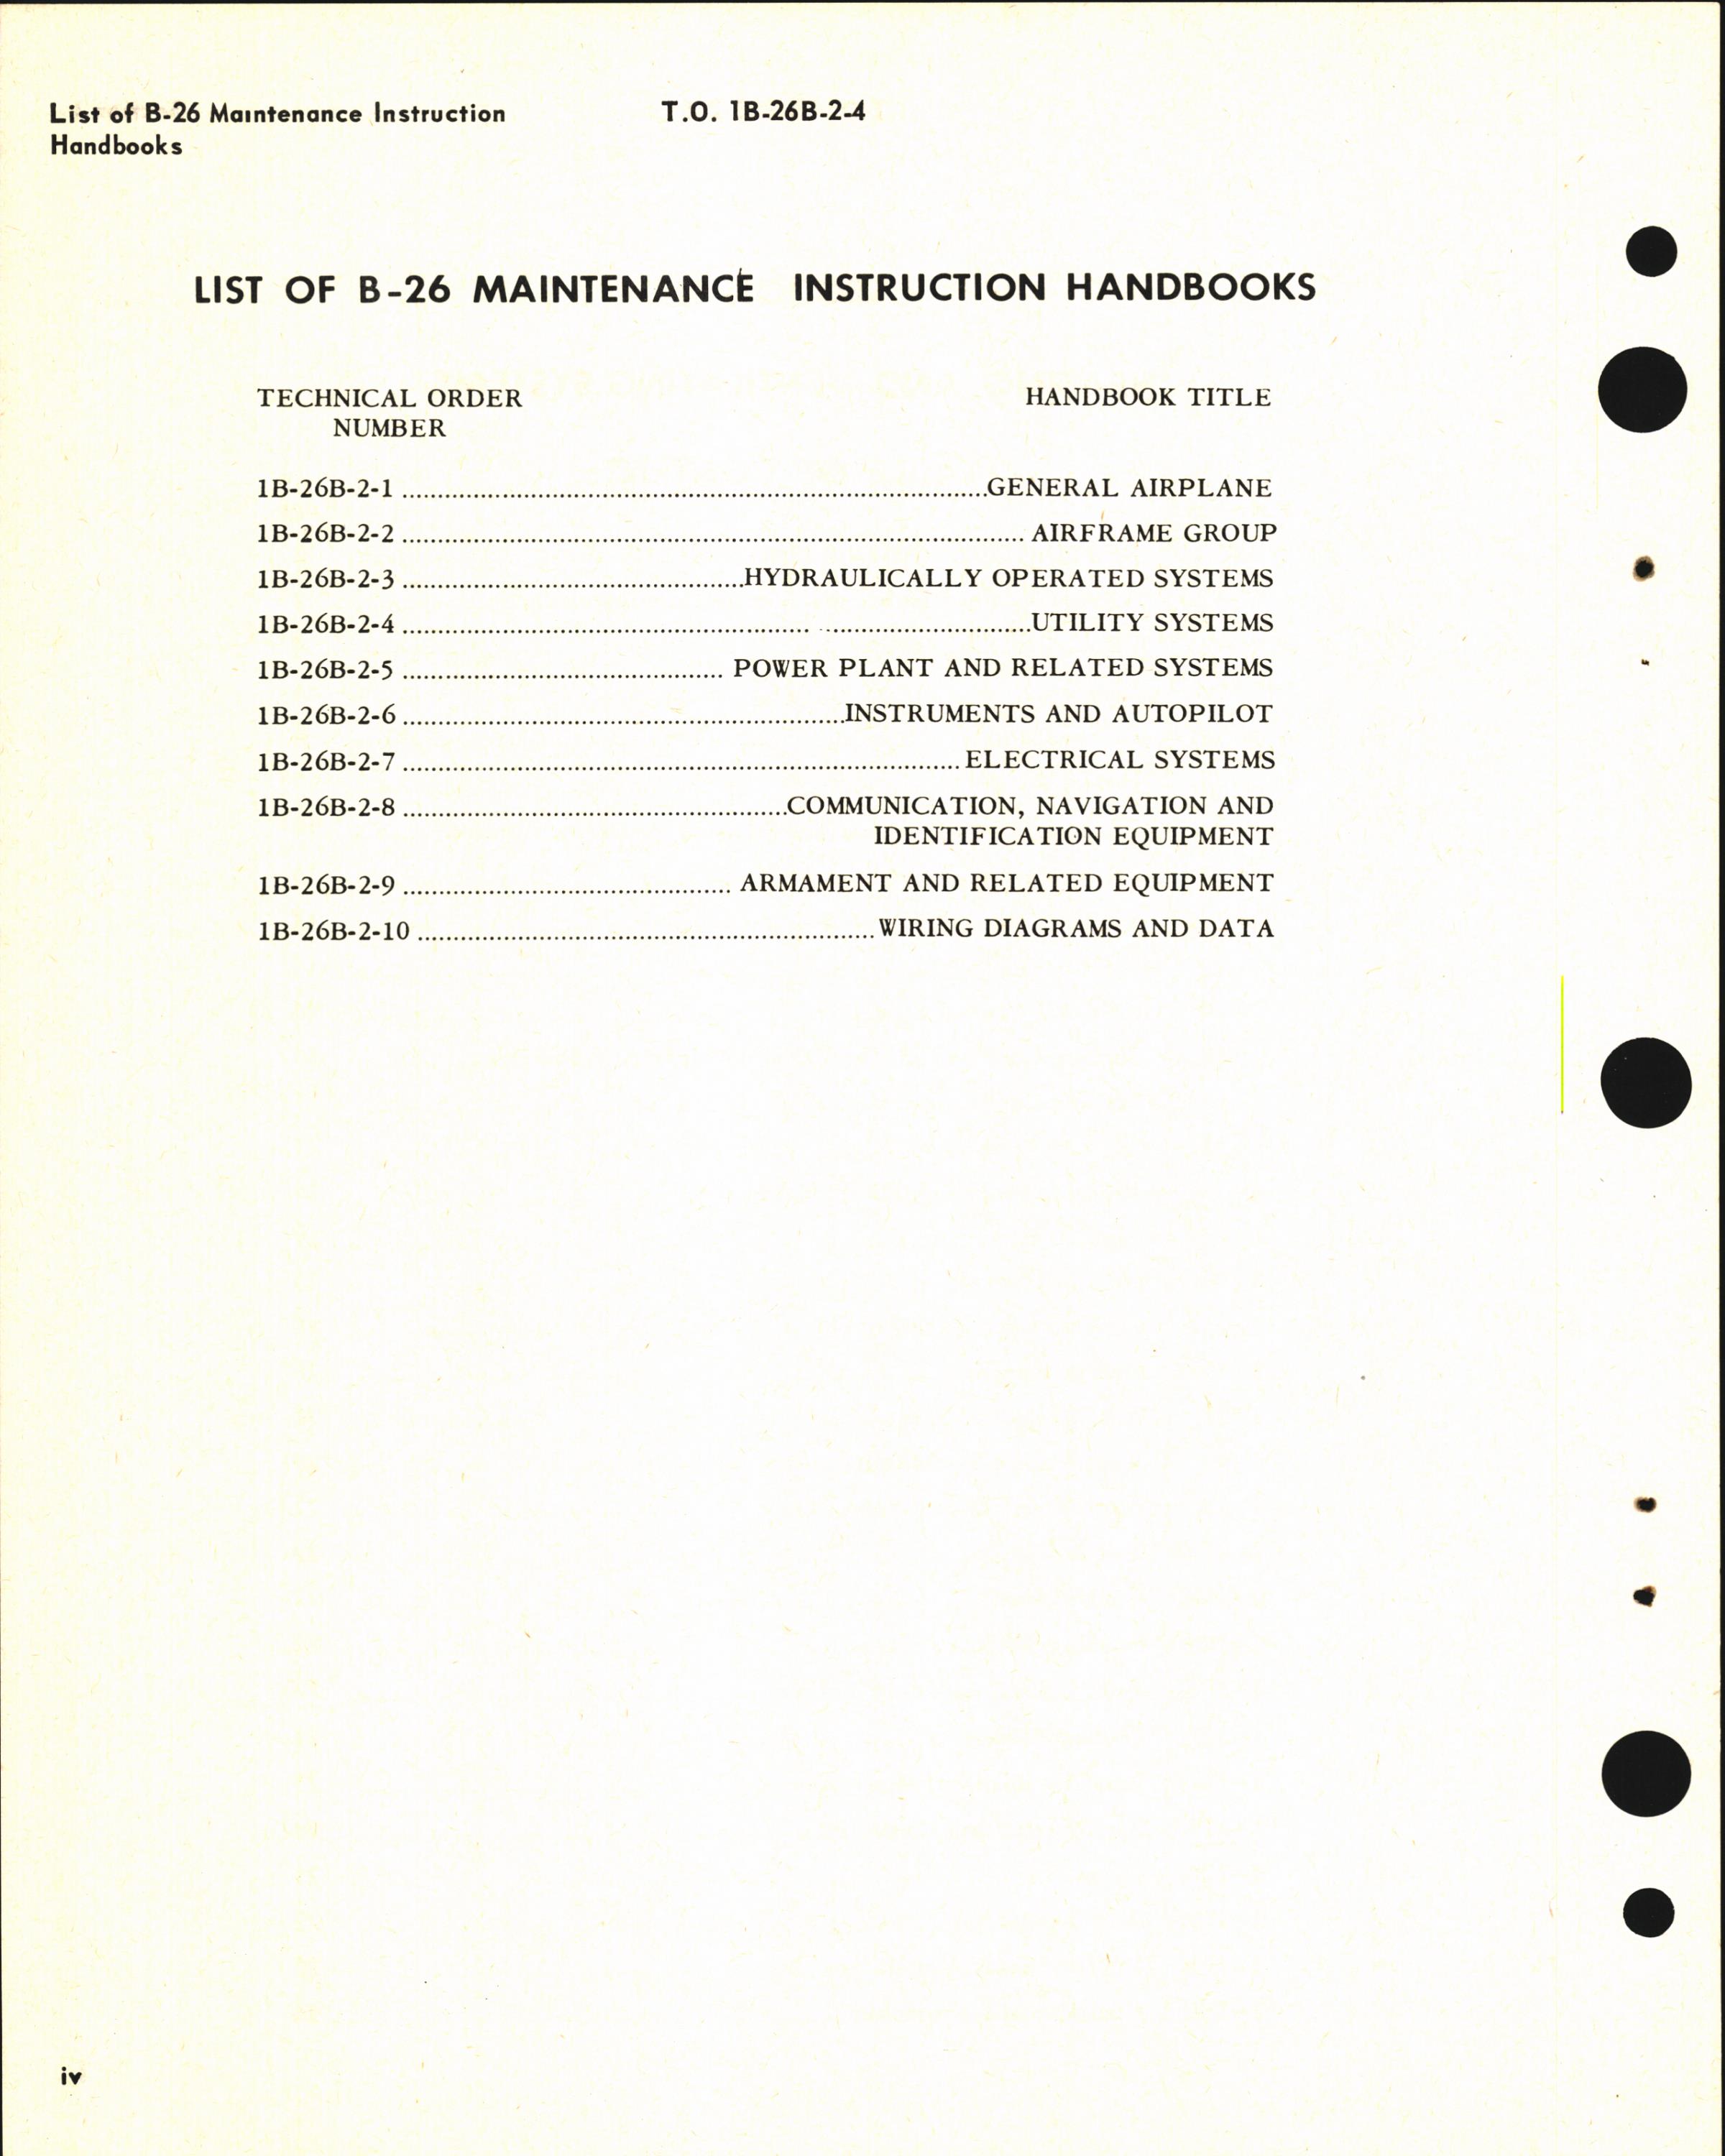 Sample page 6 from AirCorps Library document: Maintenance Instructions for B-26B, B-26C, TB-26B, TB-26C, and JD-1 - Utility Systems